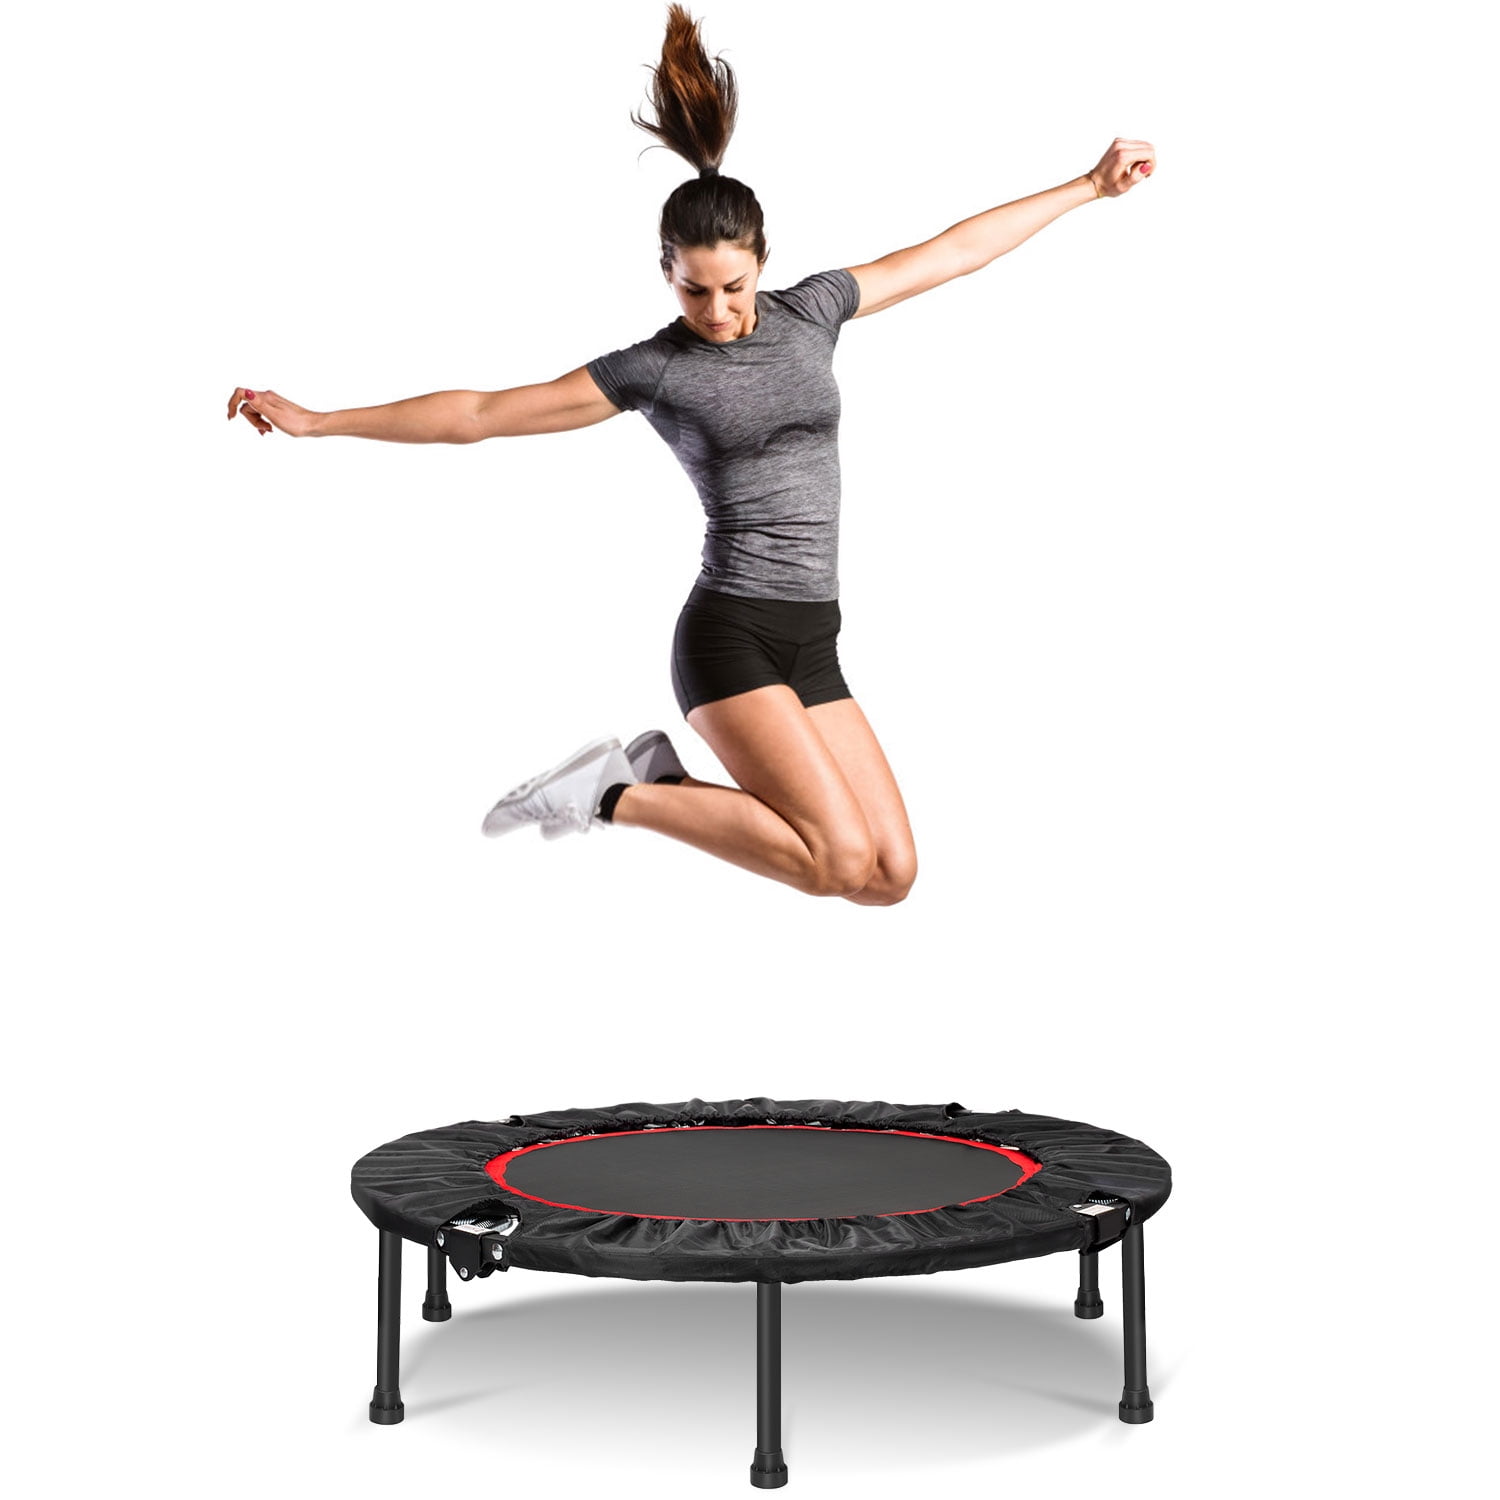 Details about   40''Round Rebounder Jumping bouncing Trampoline Pad Workout/ Fitness US a e c 08 